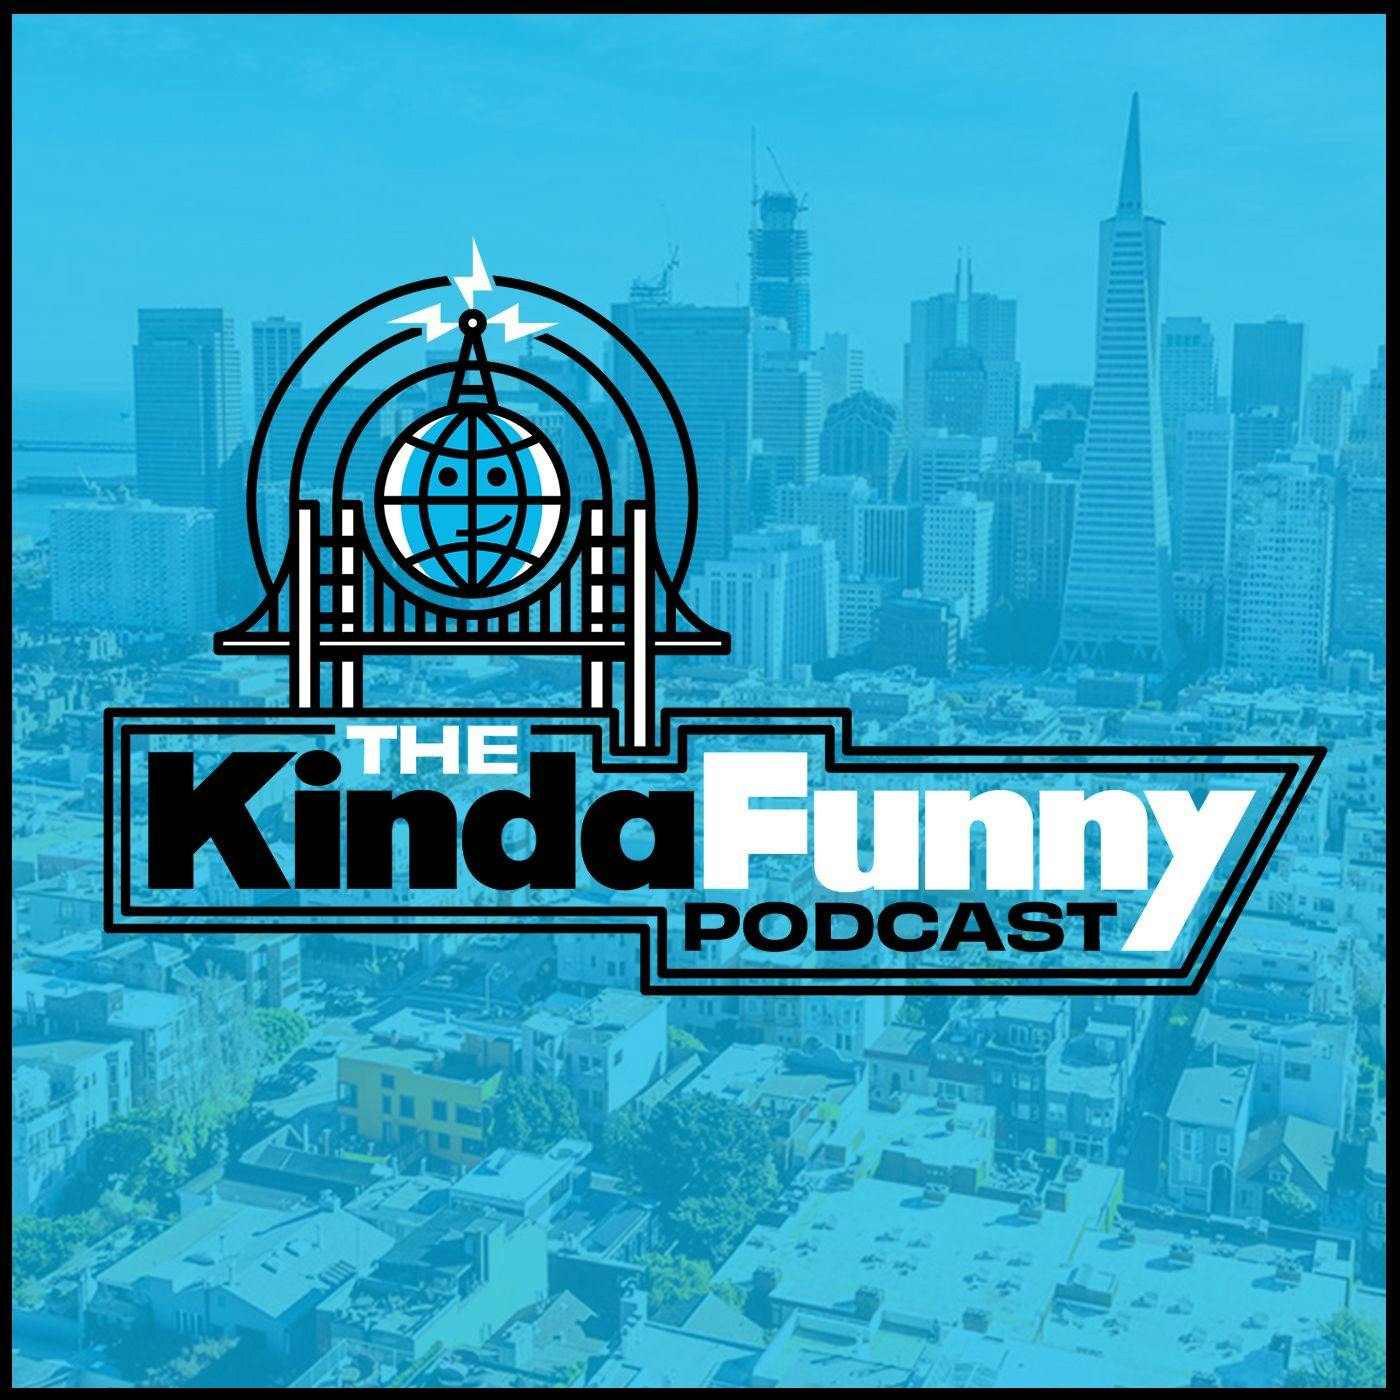 What Sports Could We Play Professionally? - Kinda Funny Podcast (Ep. 59)